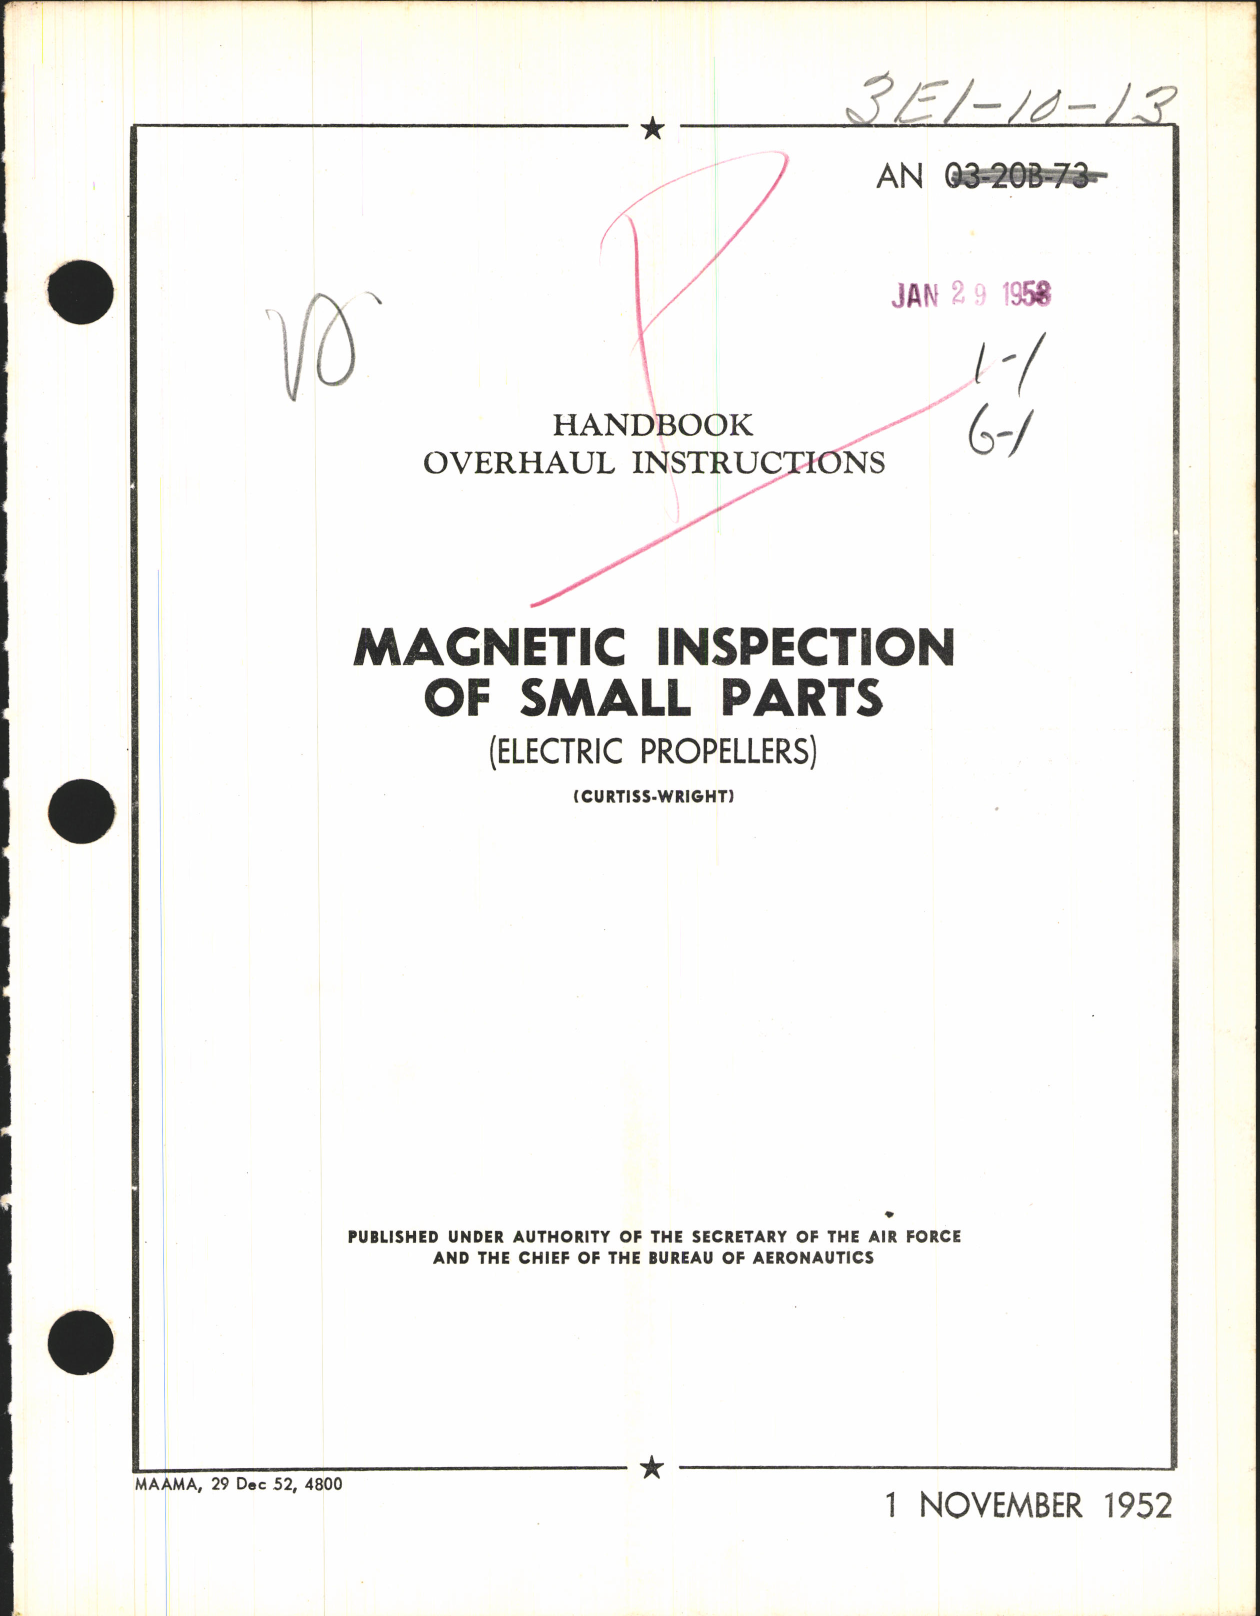 Sample page 1 from AirCorps Library document: Overhaul Instructions for Magnetic Inspection of Small Parts for Electric Propellers